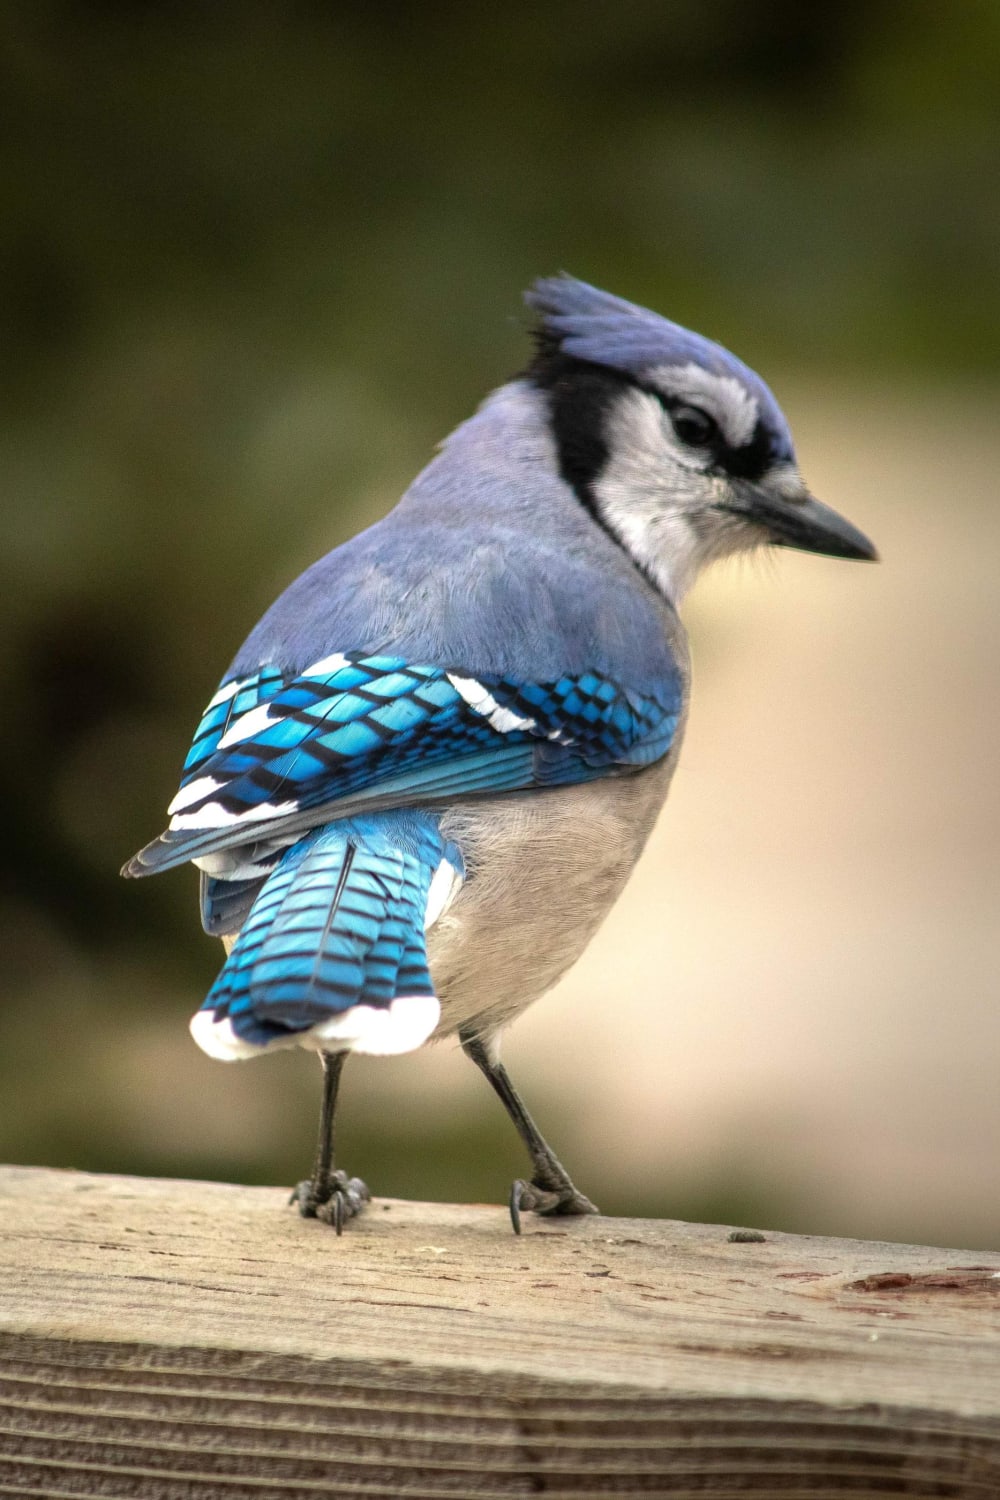 The wings of a Blue Jay